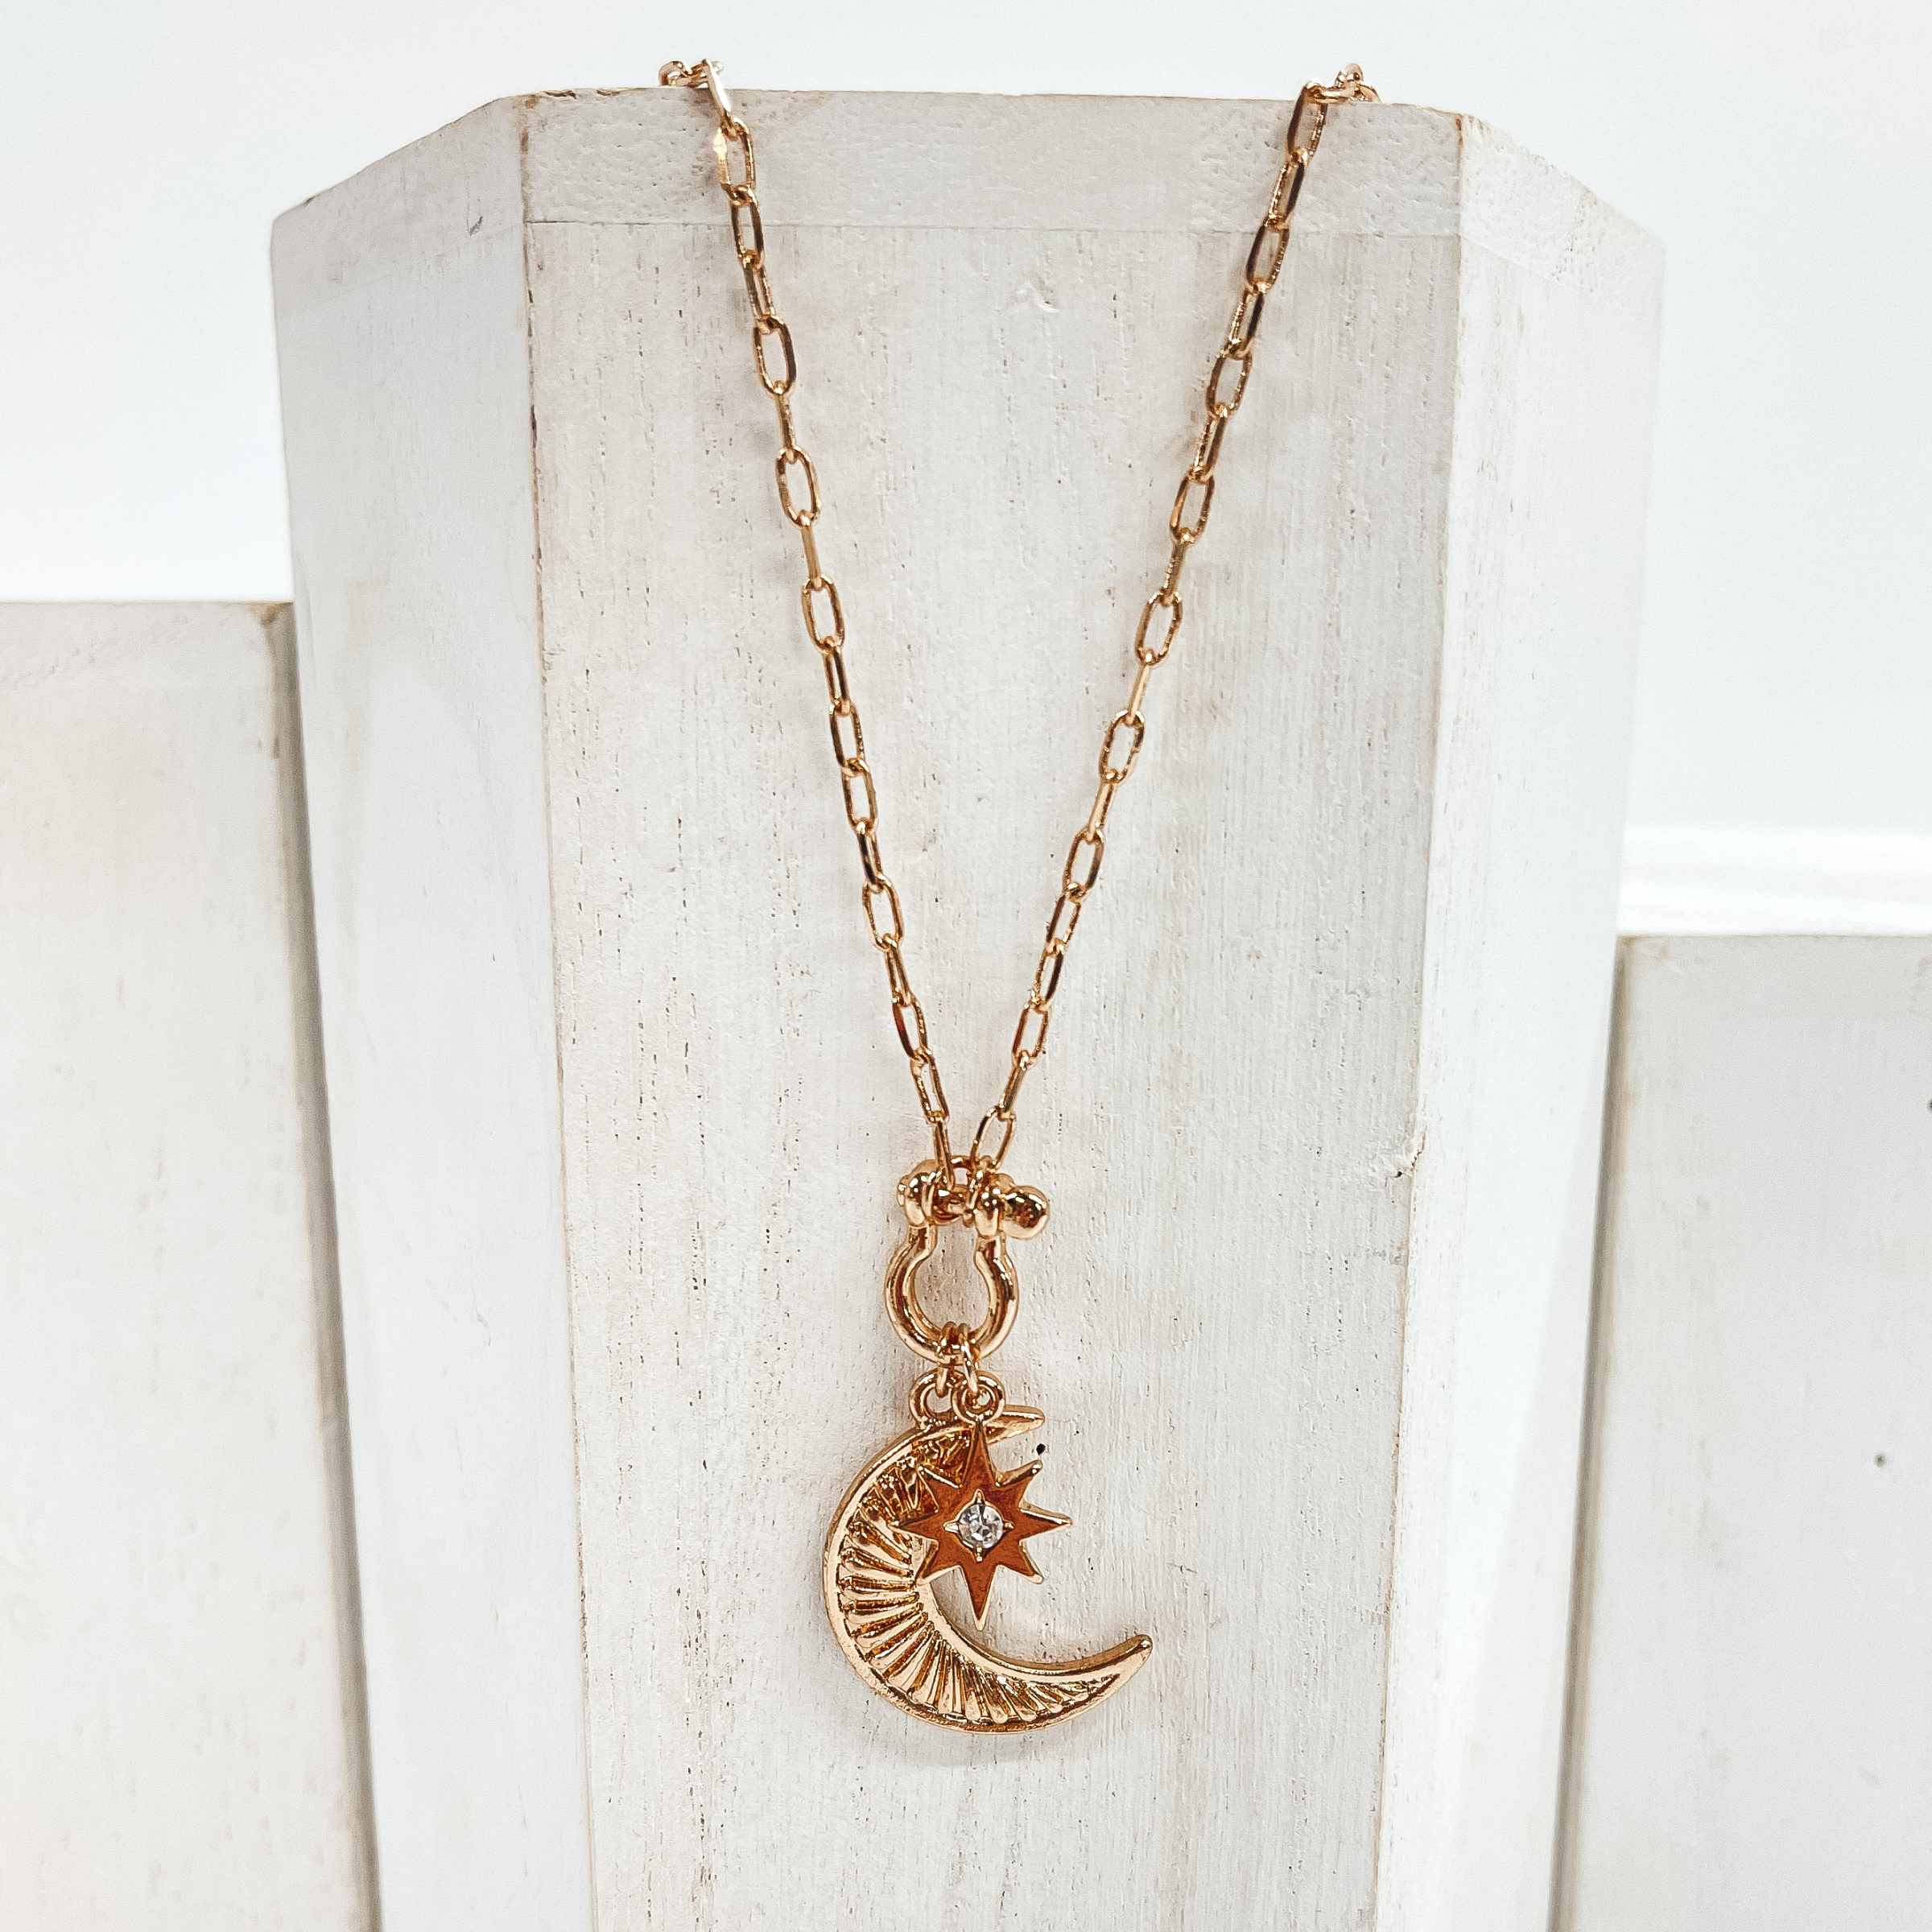 Chain Necklace with Sunburst Moon and Star Pendant in Gold - Giddy Up Glamour Boutique